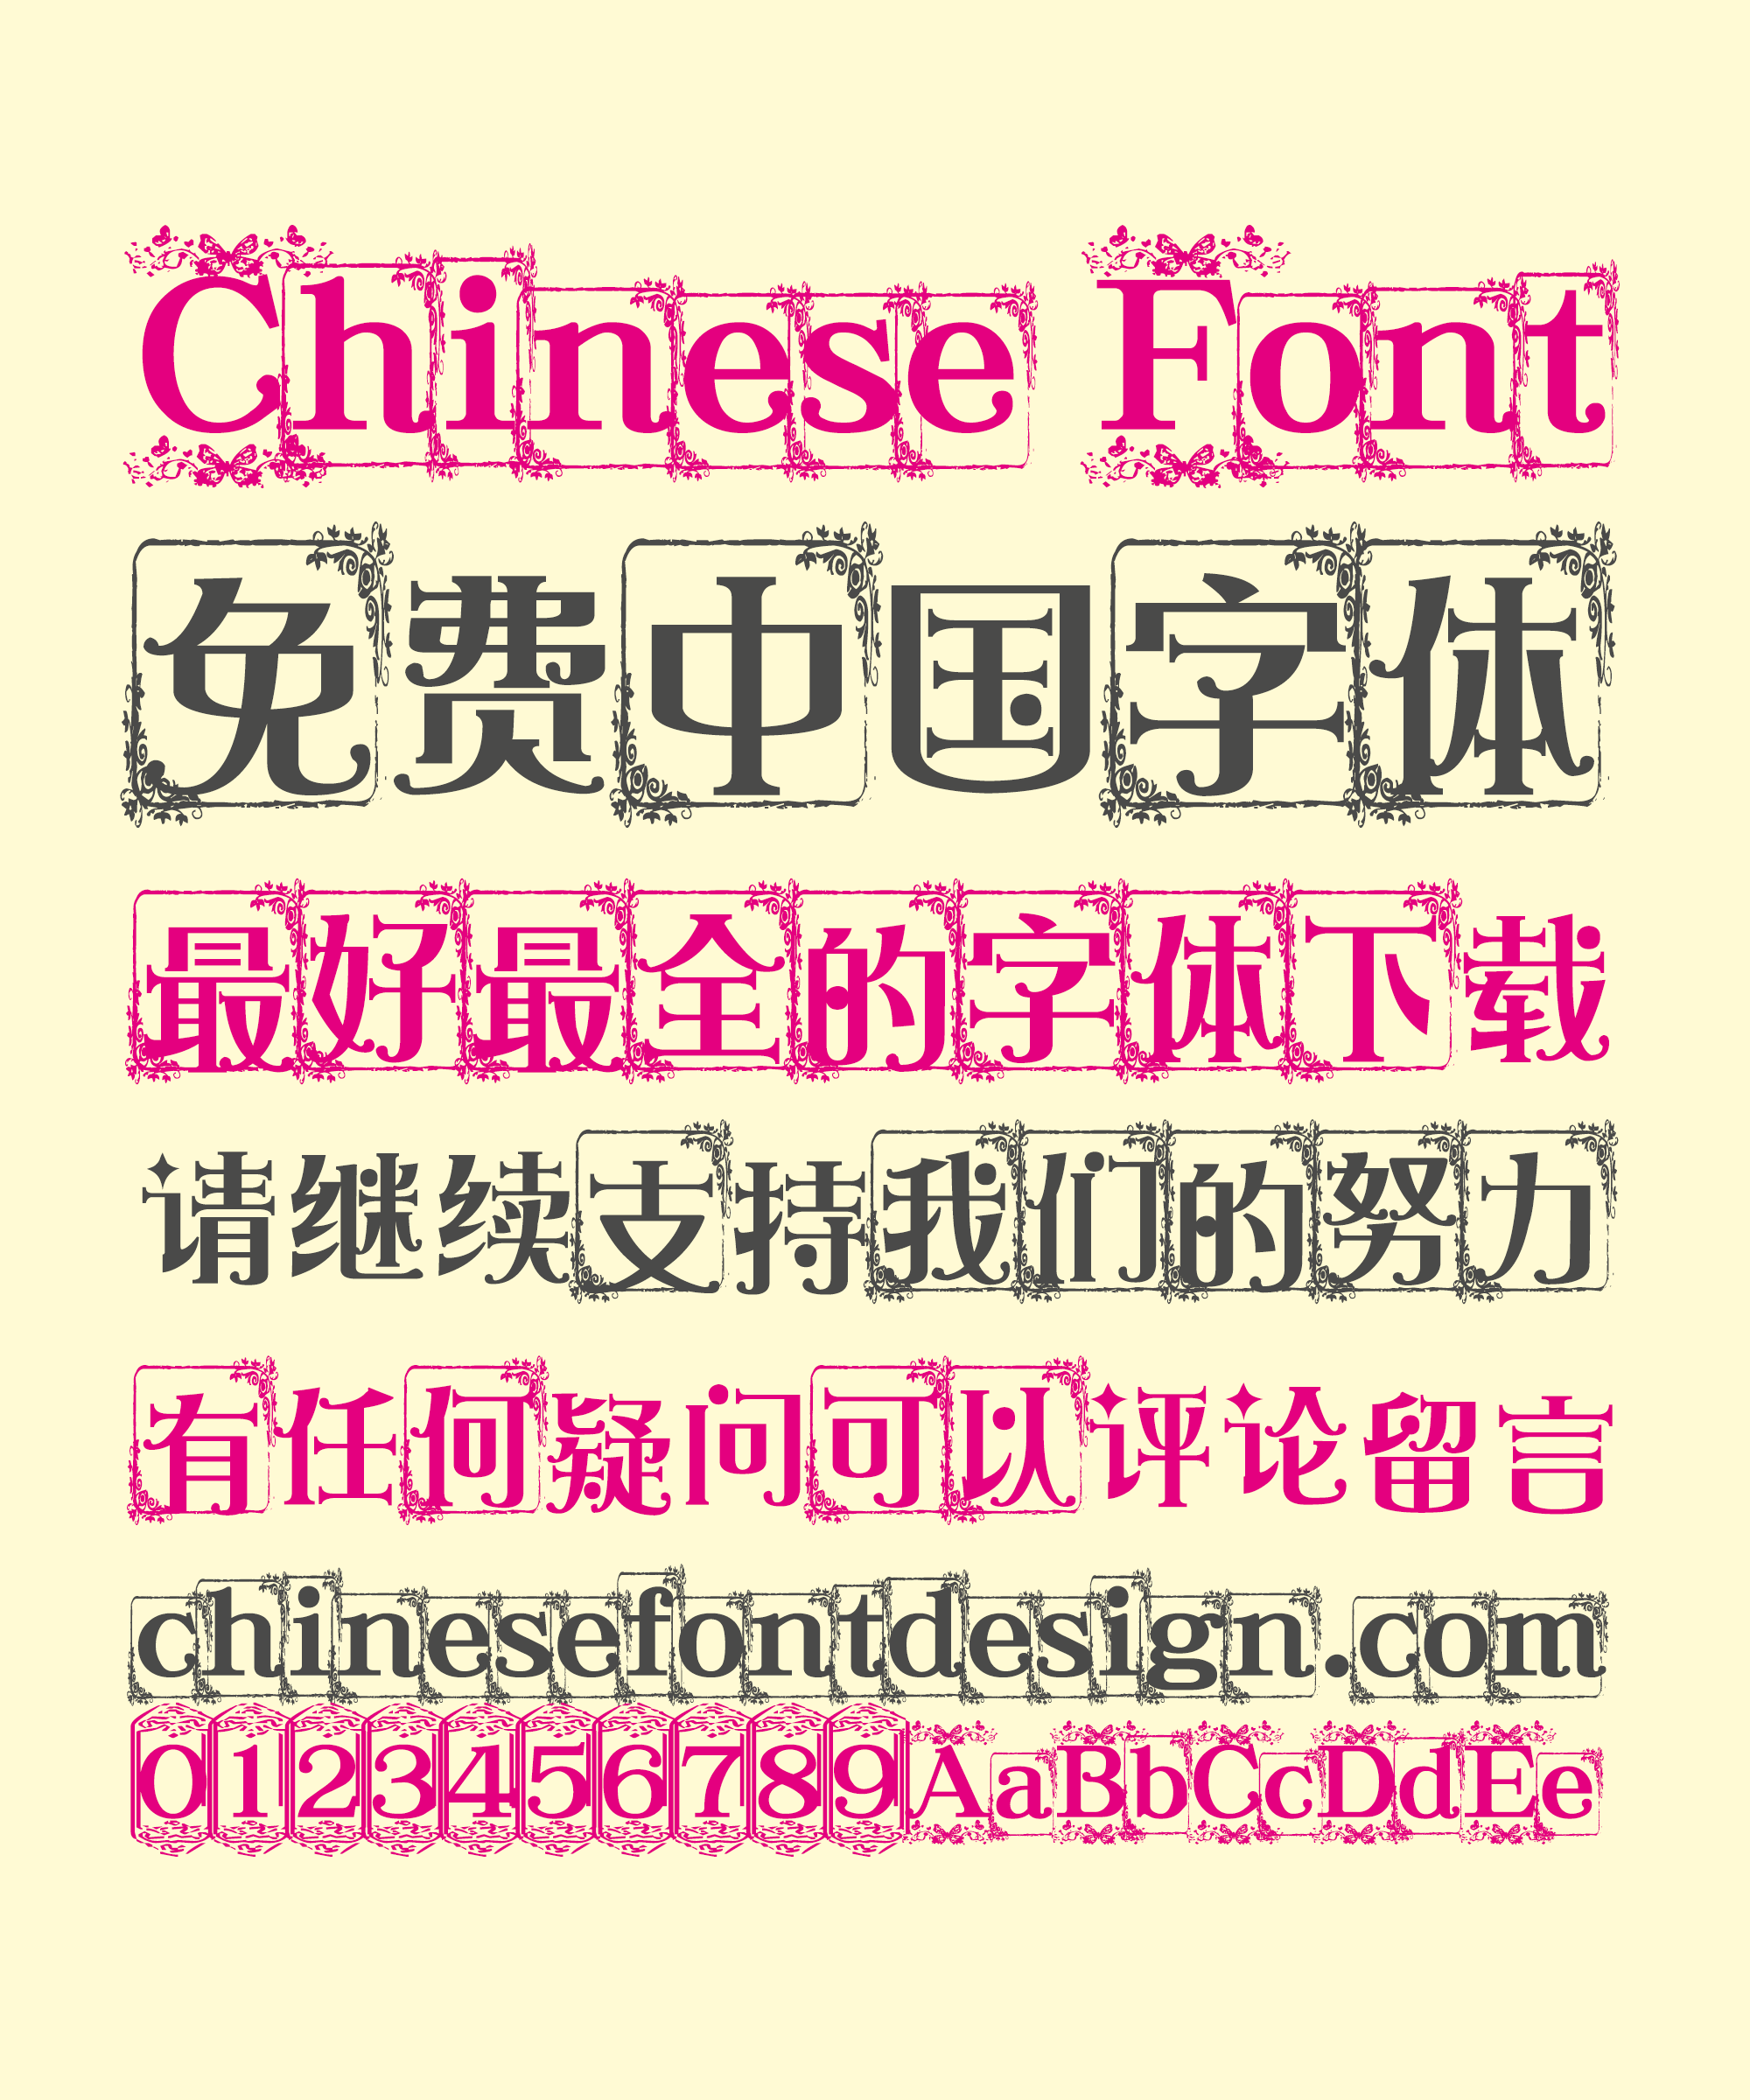 free ttf fonts to download